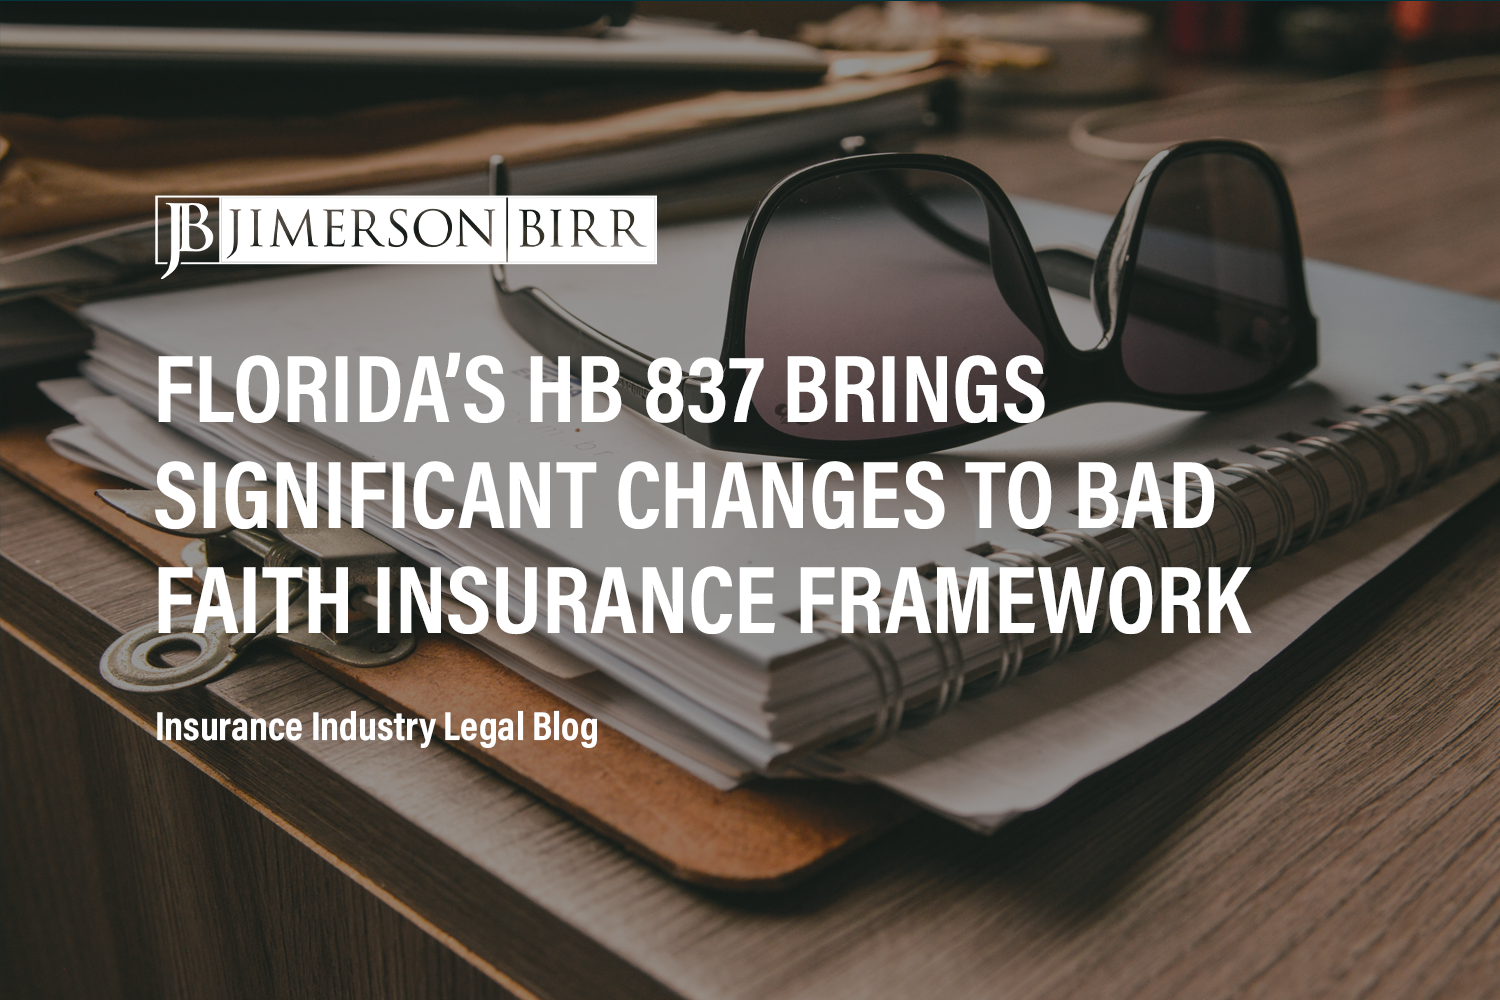 Florida’s HB 837 brings significant changes to bad faith insurance framework